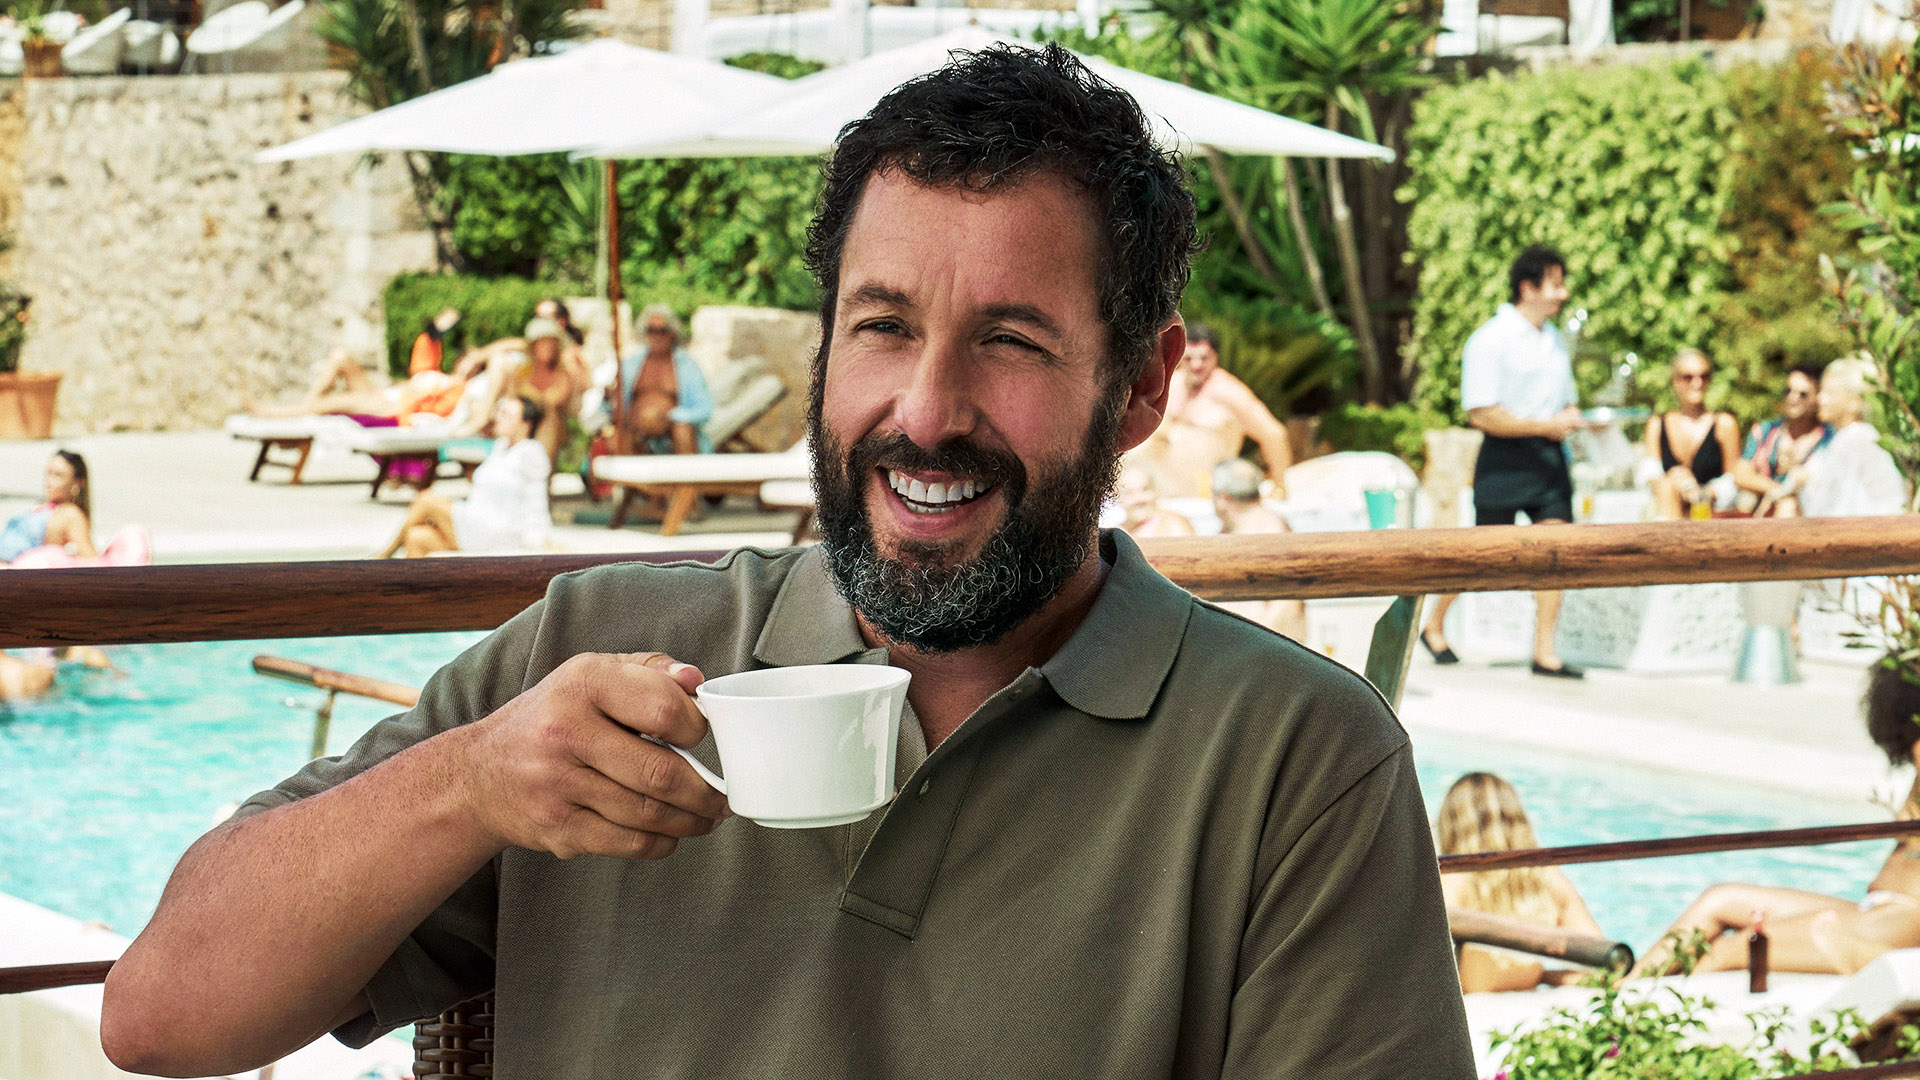 8 Best Adam Sandler Movies, Ranked by Rotten Tomatoes Score